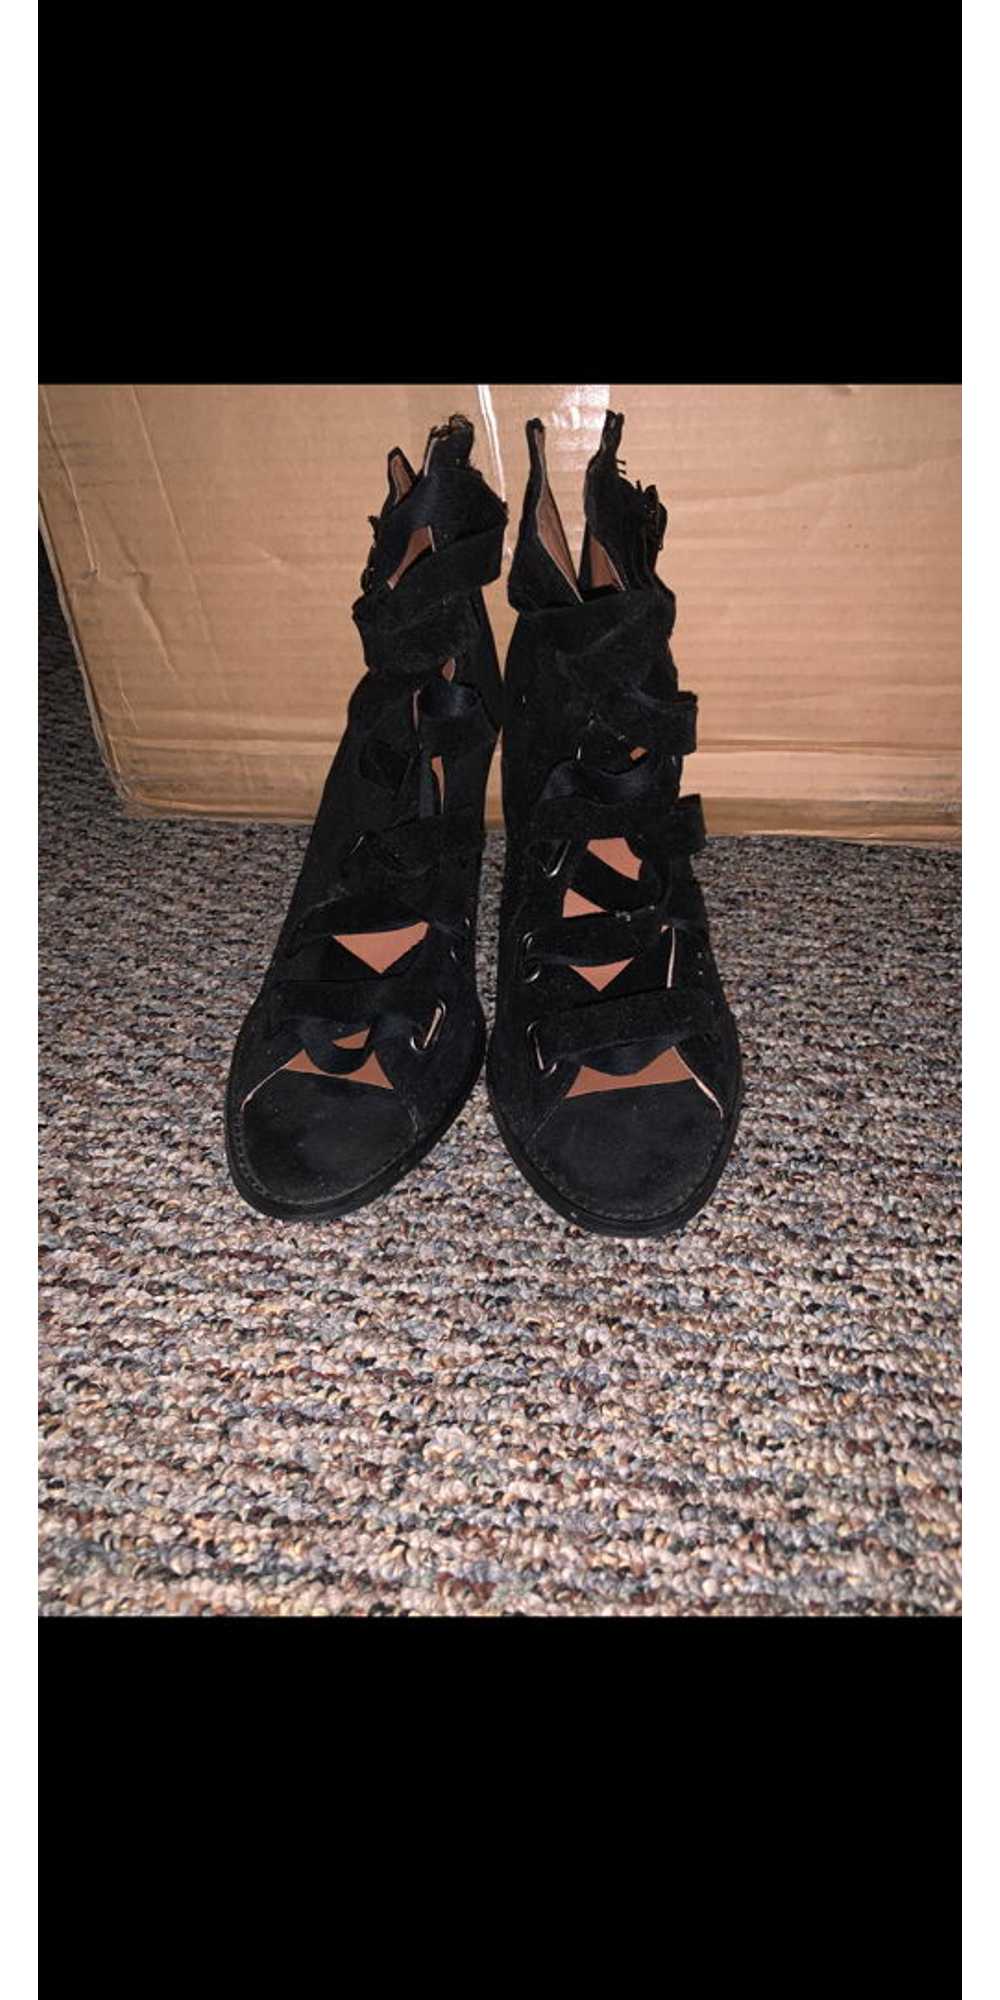 Tall Size Black booties - image 1